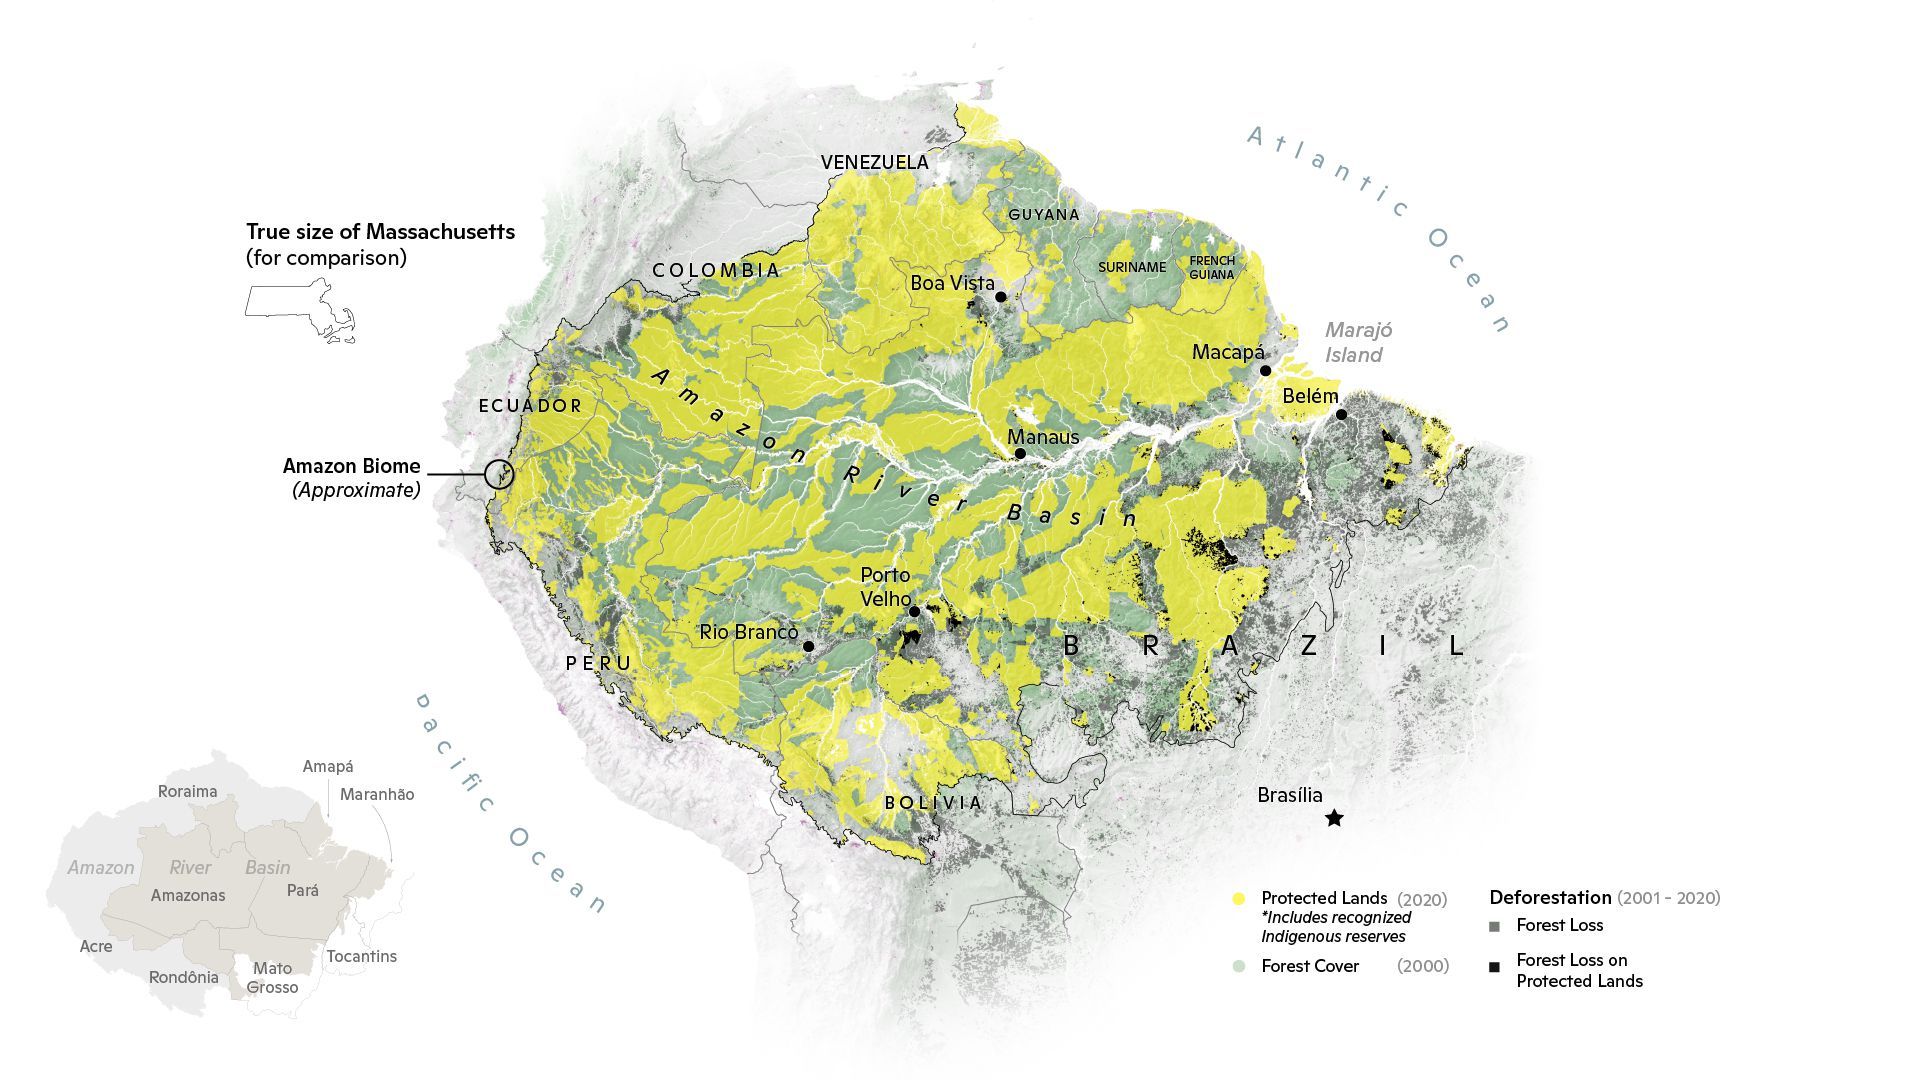 Picture of a map shoring forest coverage in South America